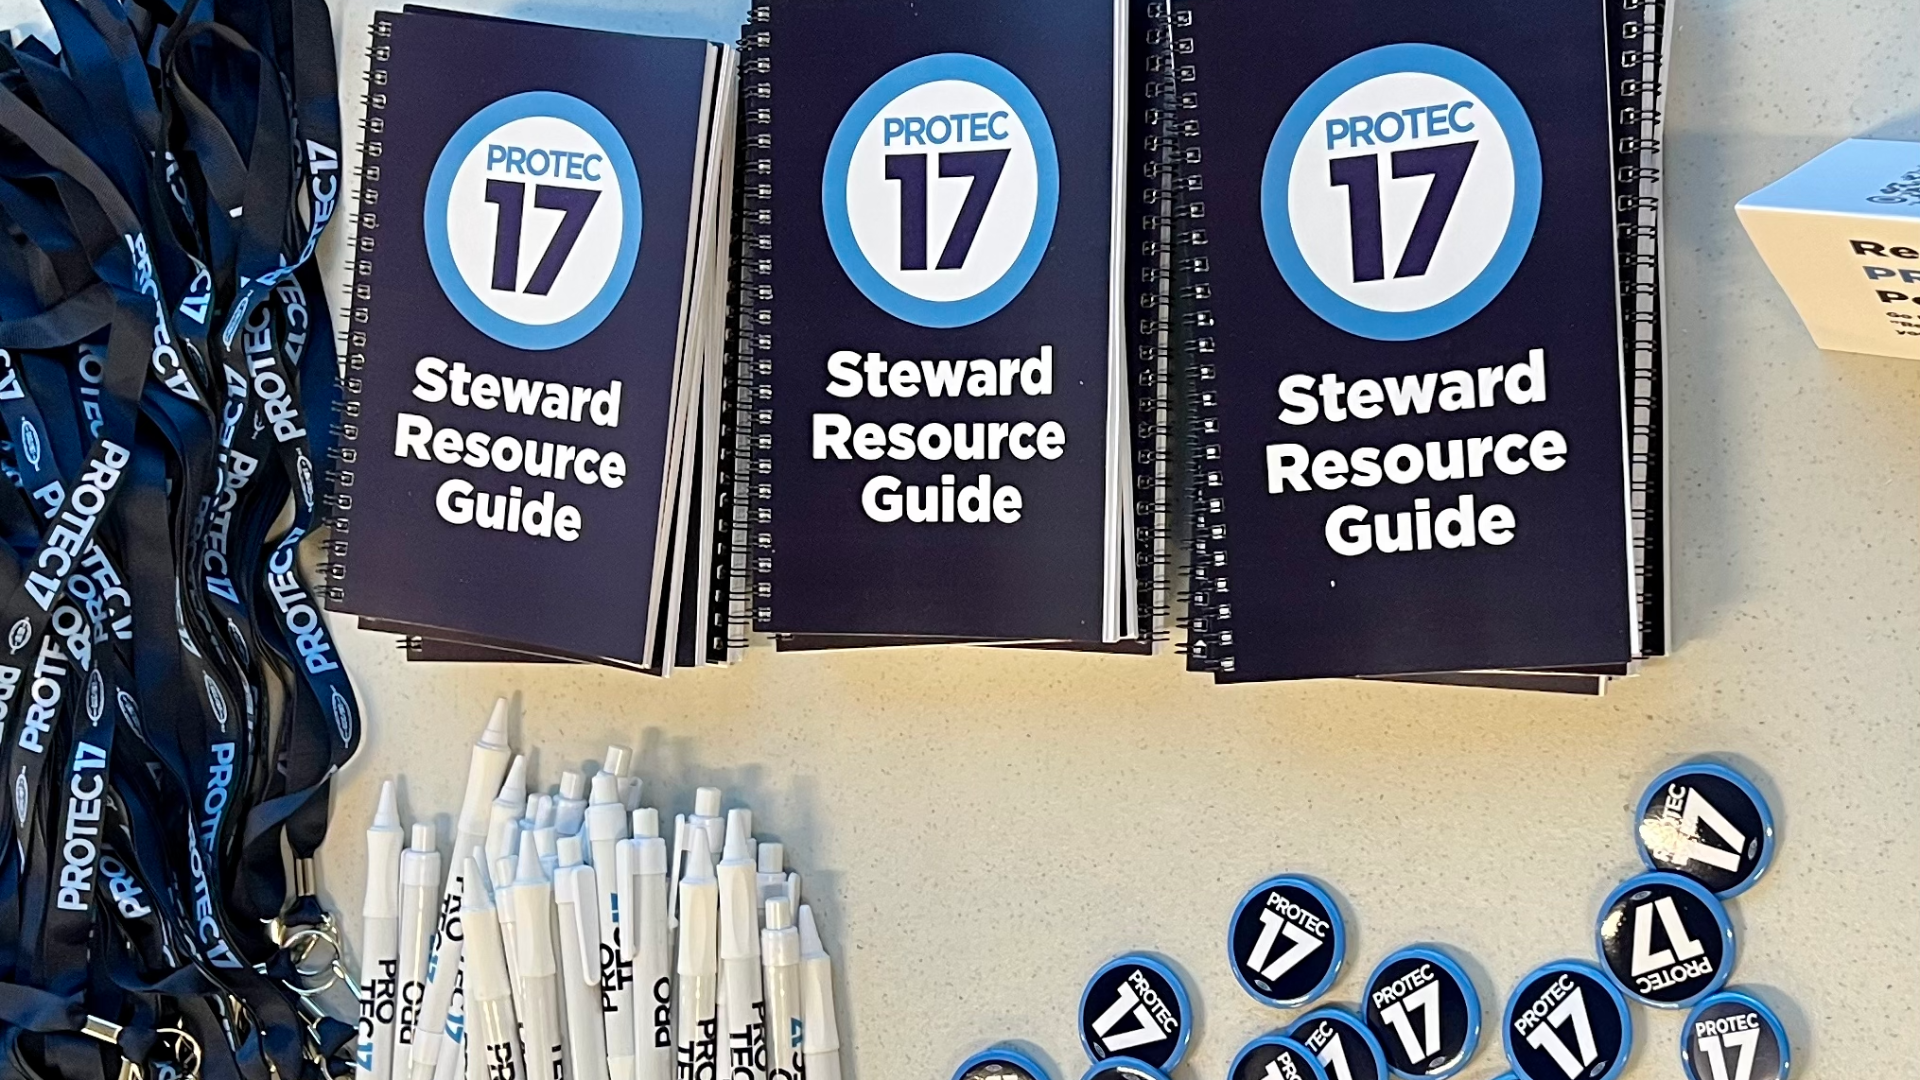 Picture of the new PROTEC17 Steward Guides alongside PROTEC17 lanyards and pins.